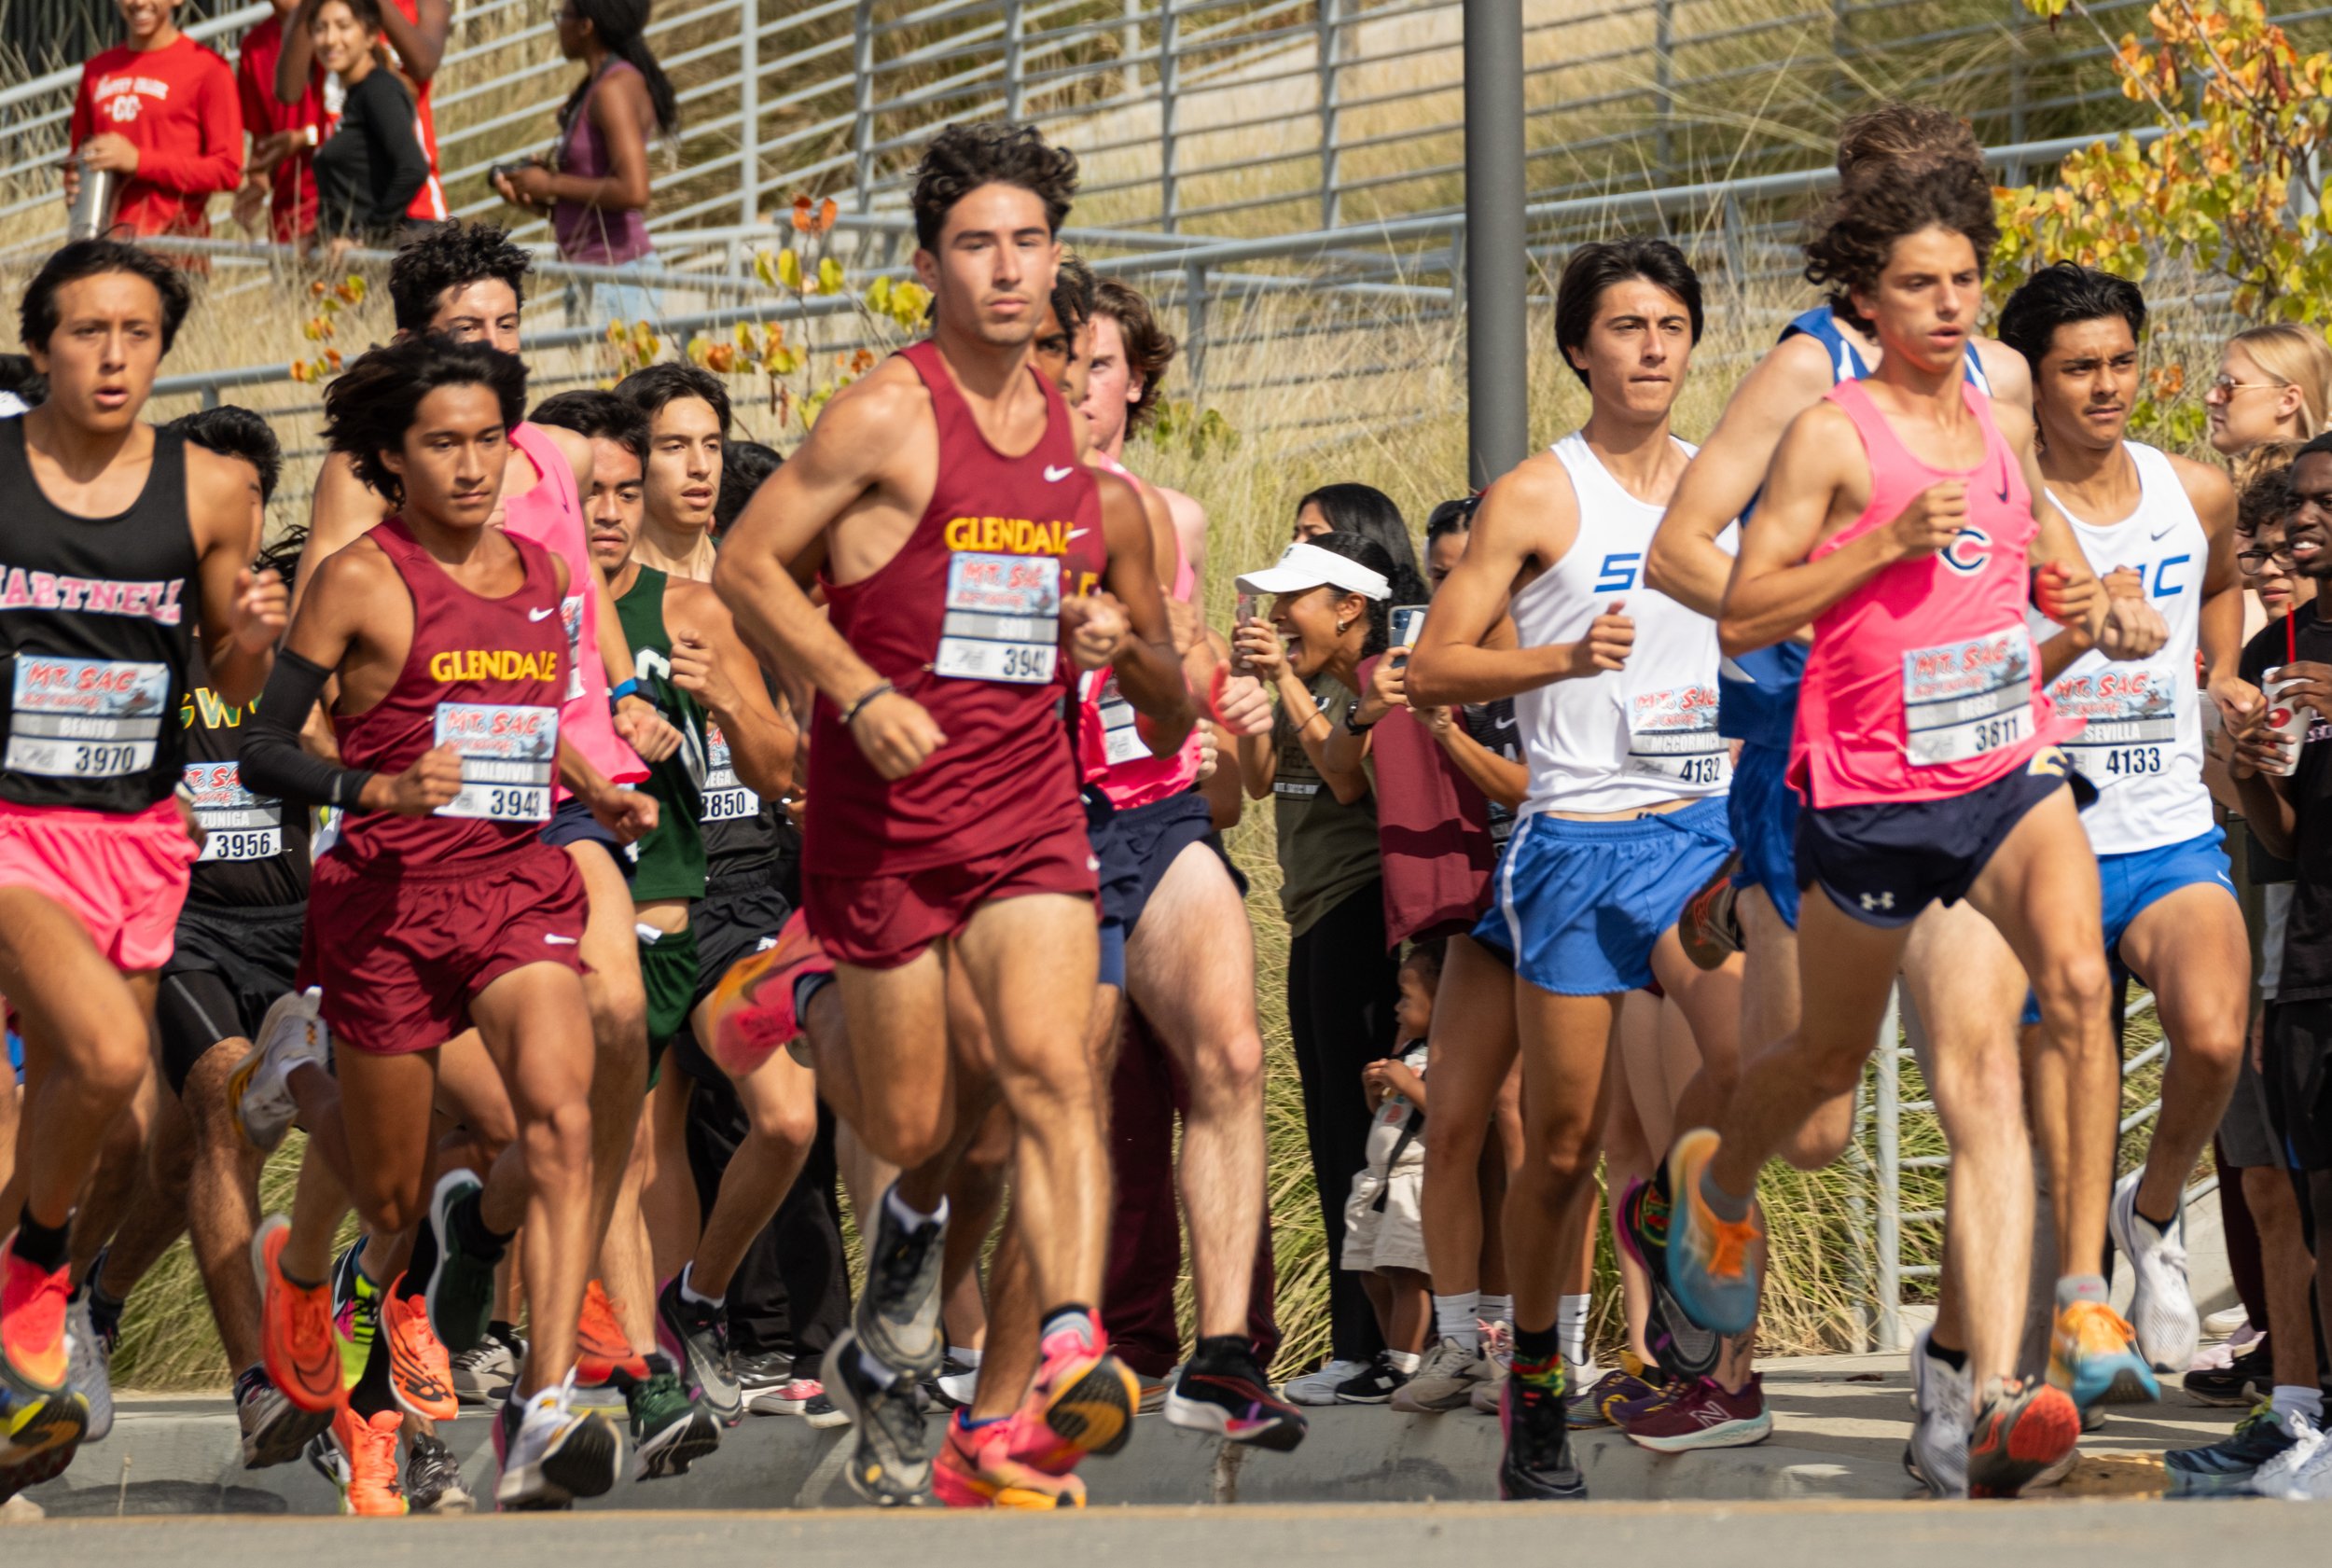  the begining of the men's race at MT. SAC Cross Country Invitational on Friday, Oct 13 at MT. SAC in Walnut, Calif. (Danilo Perez | The Corsair) 